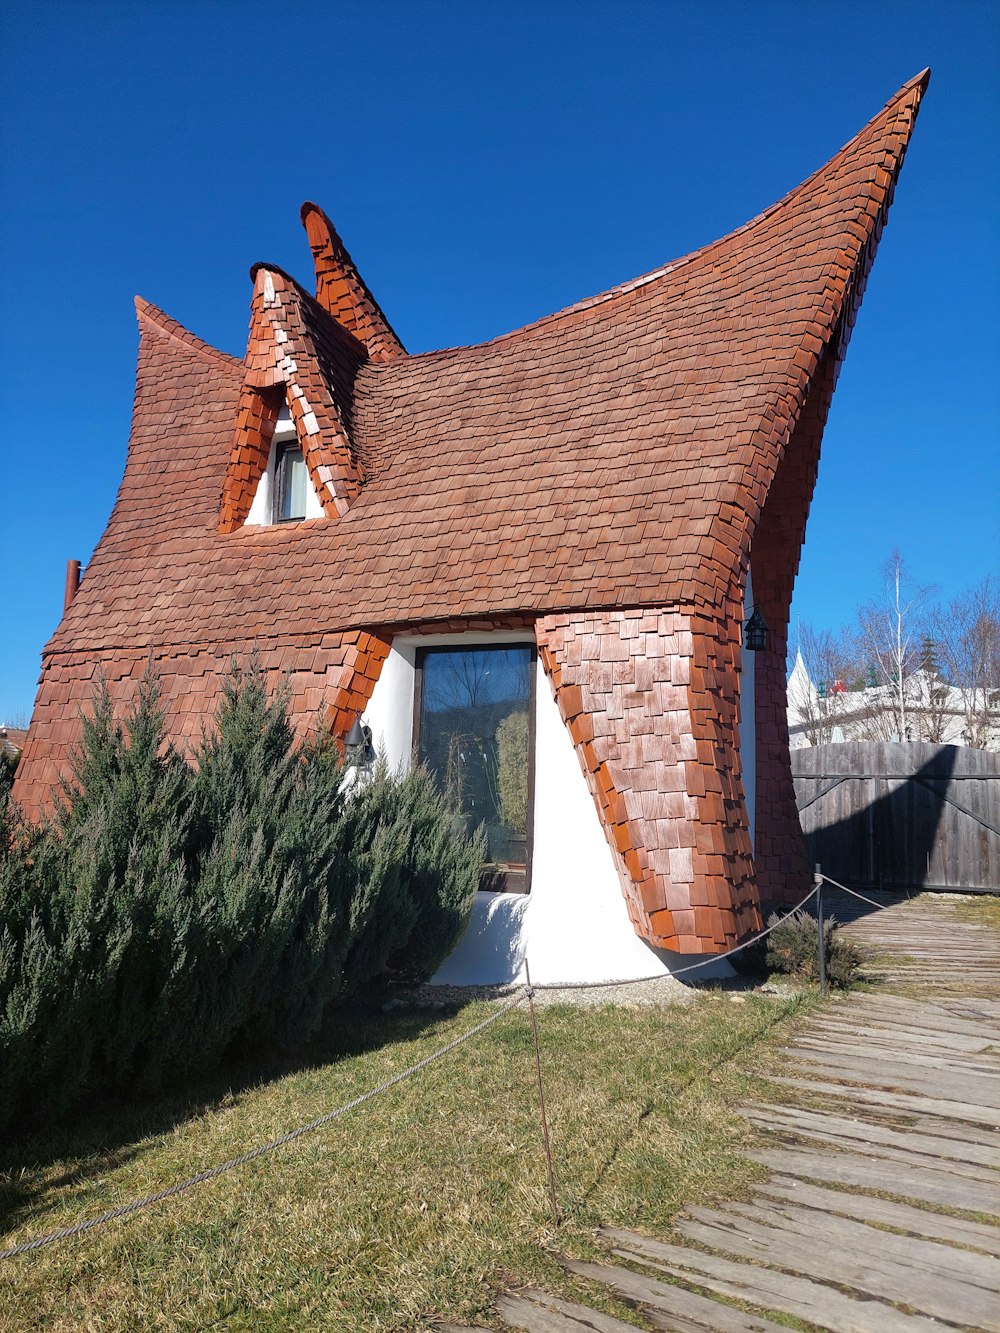 a house made of bricks with a pointed roof